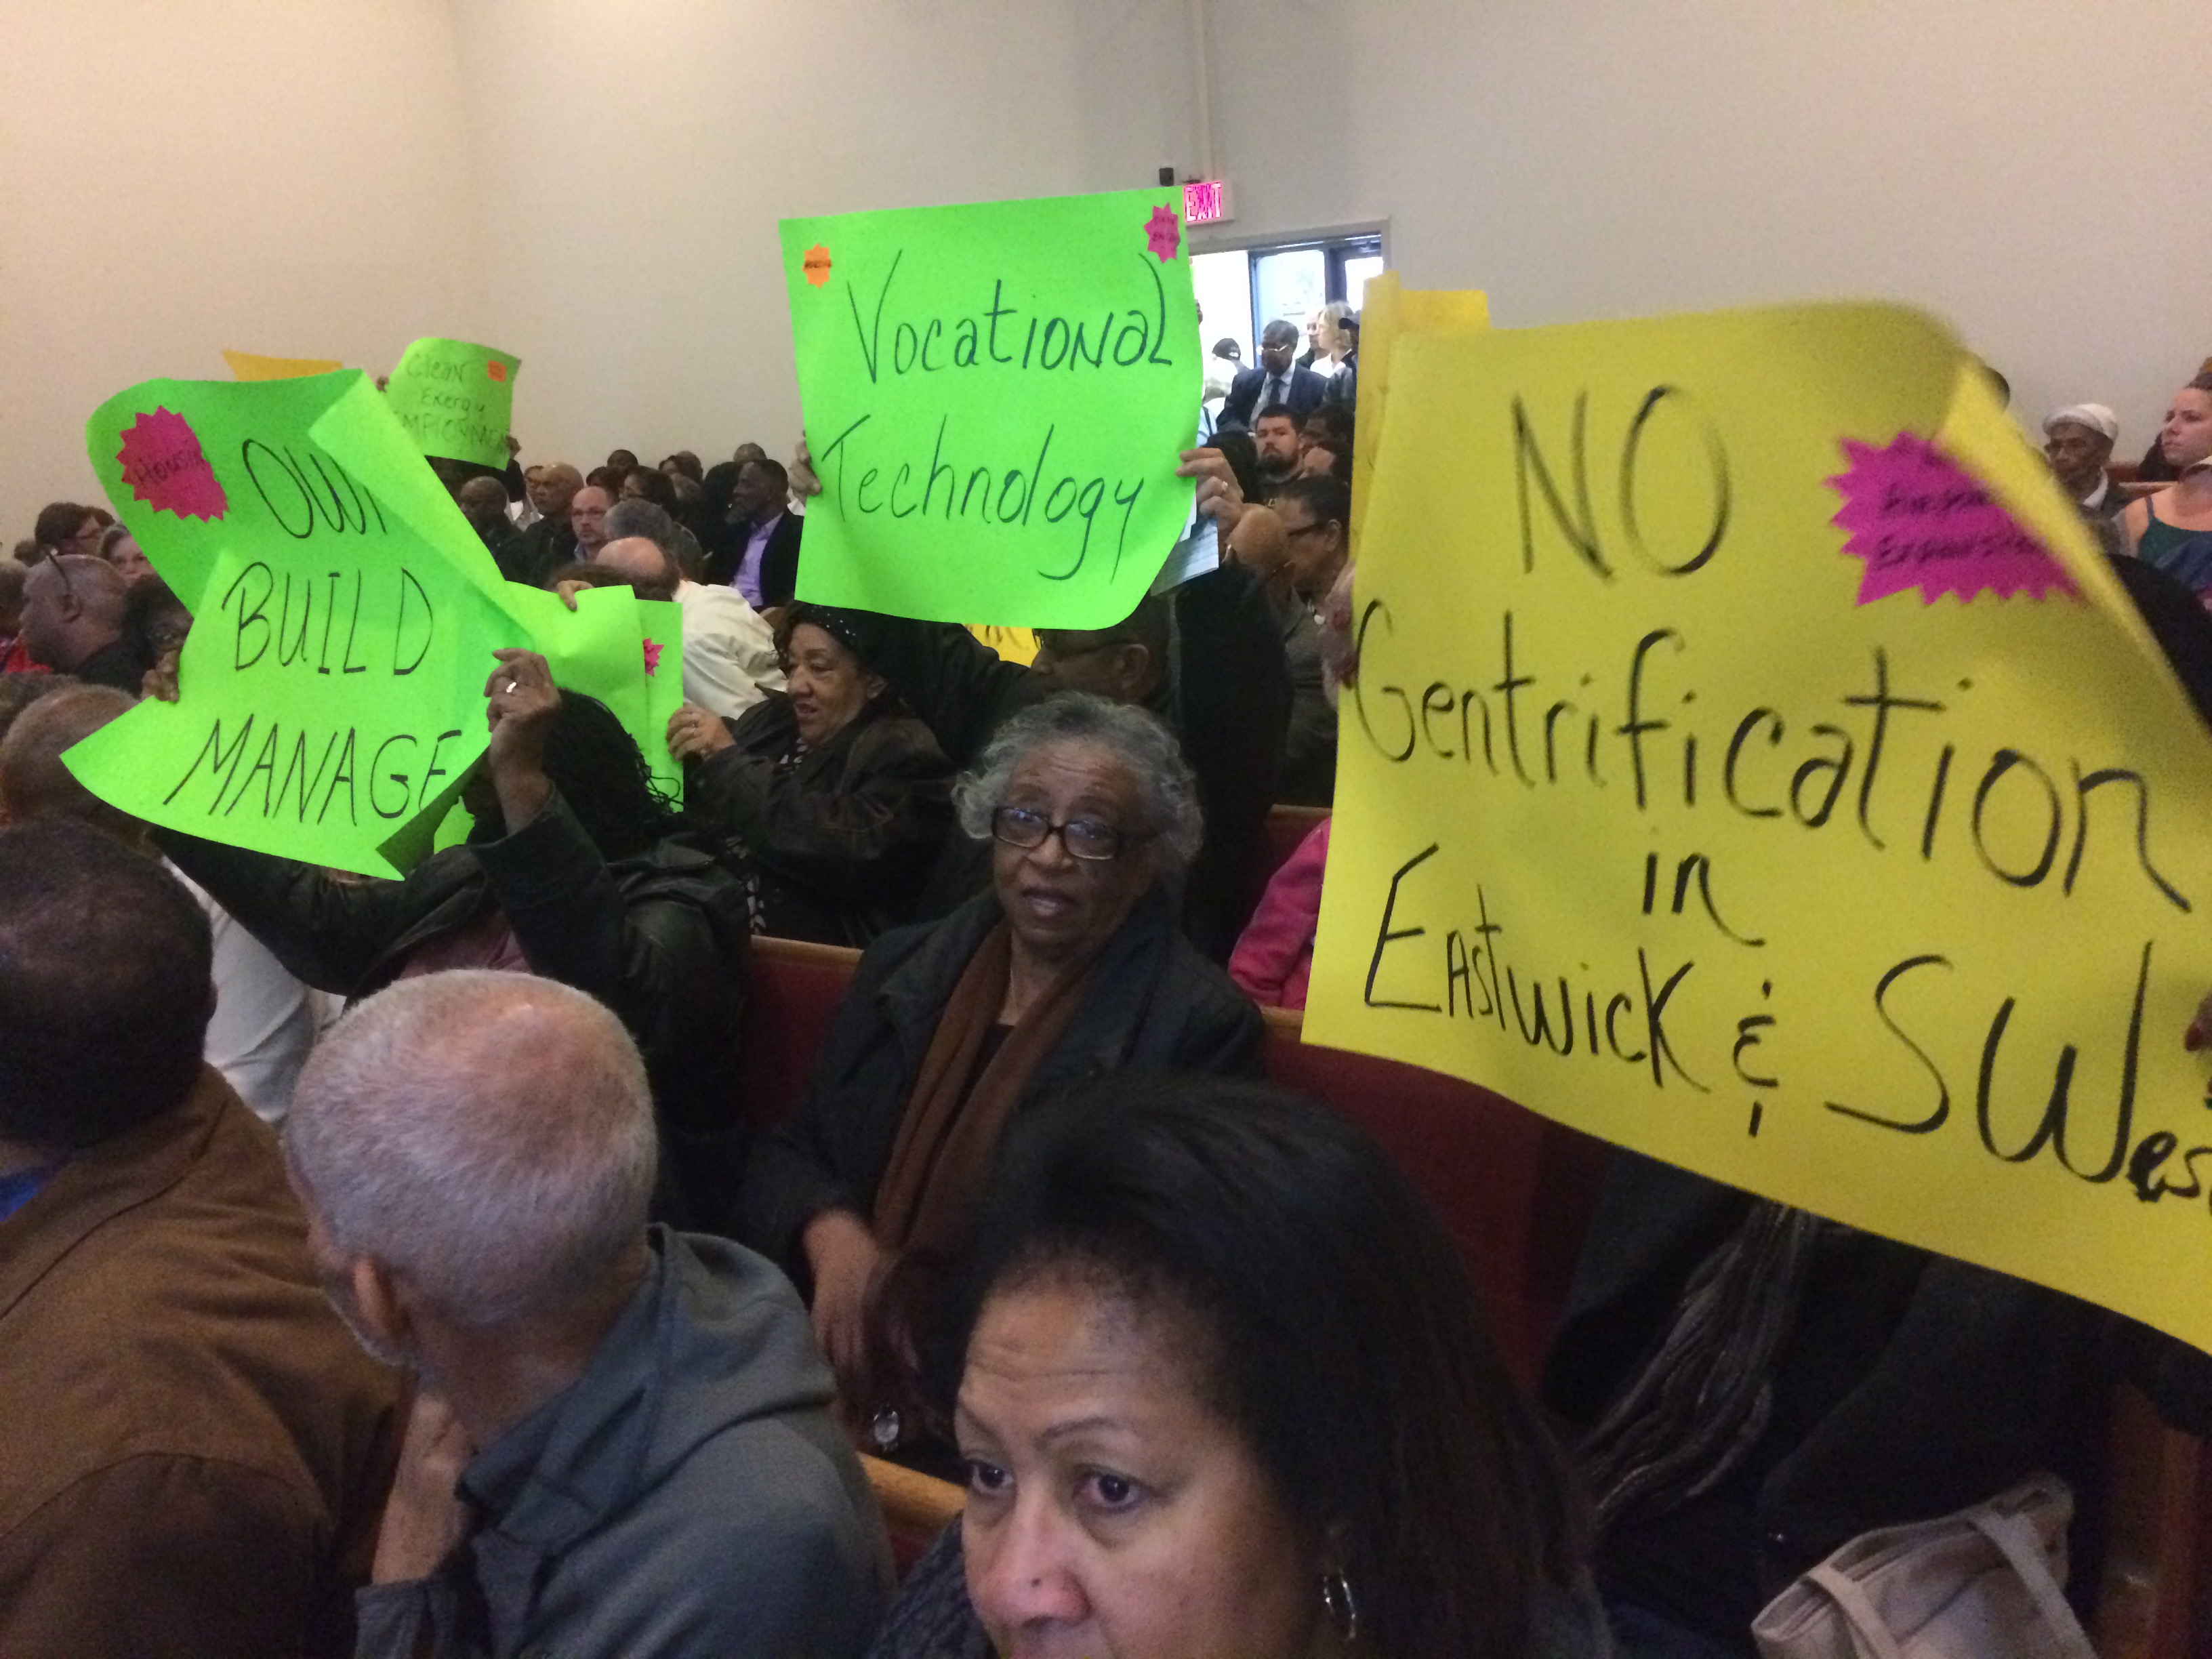 Eastwick's neighbors expressed their needs at public planning meeting